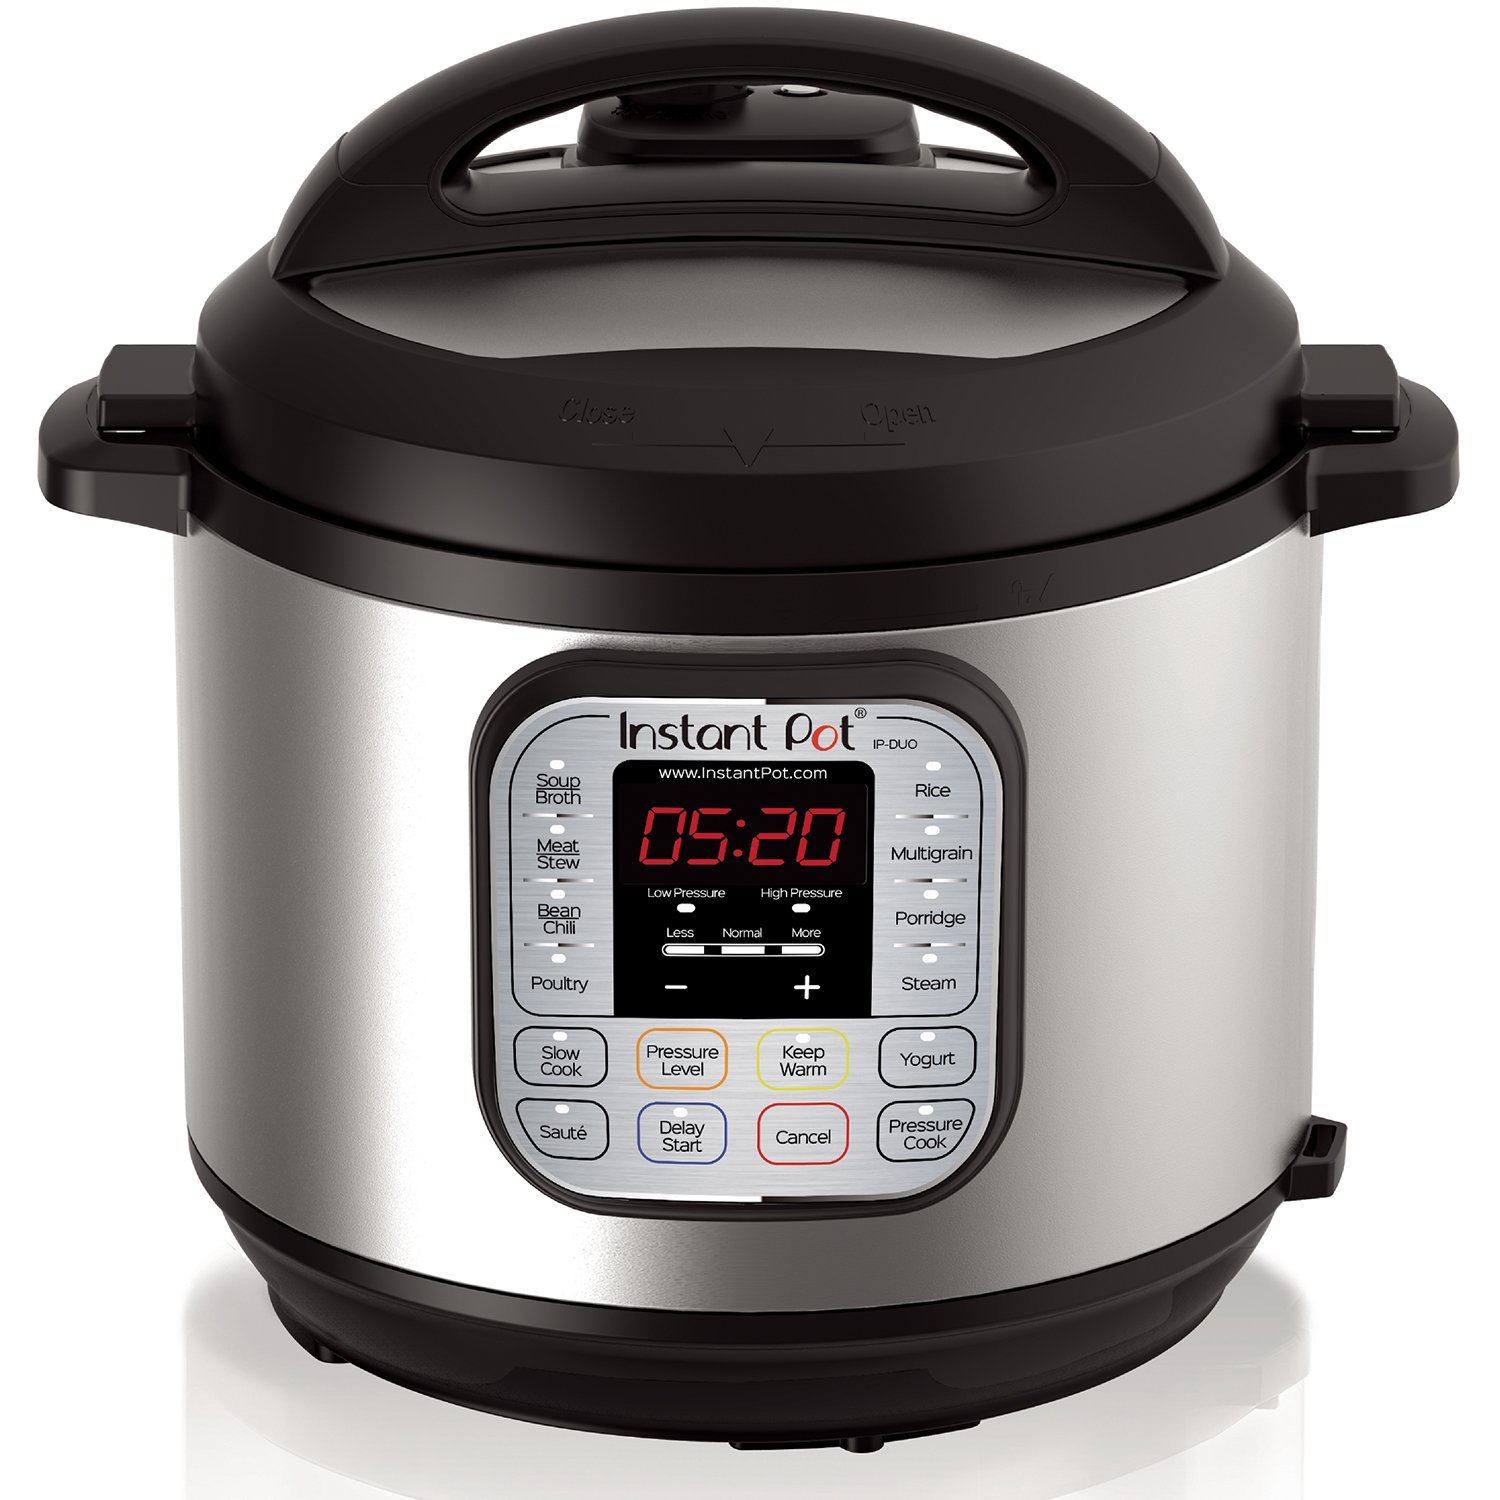 Instant Pot DUO60 6 Qt 7-in-1 Multi-Use Programmable Pressure Cooker Review